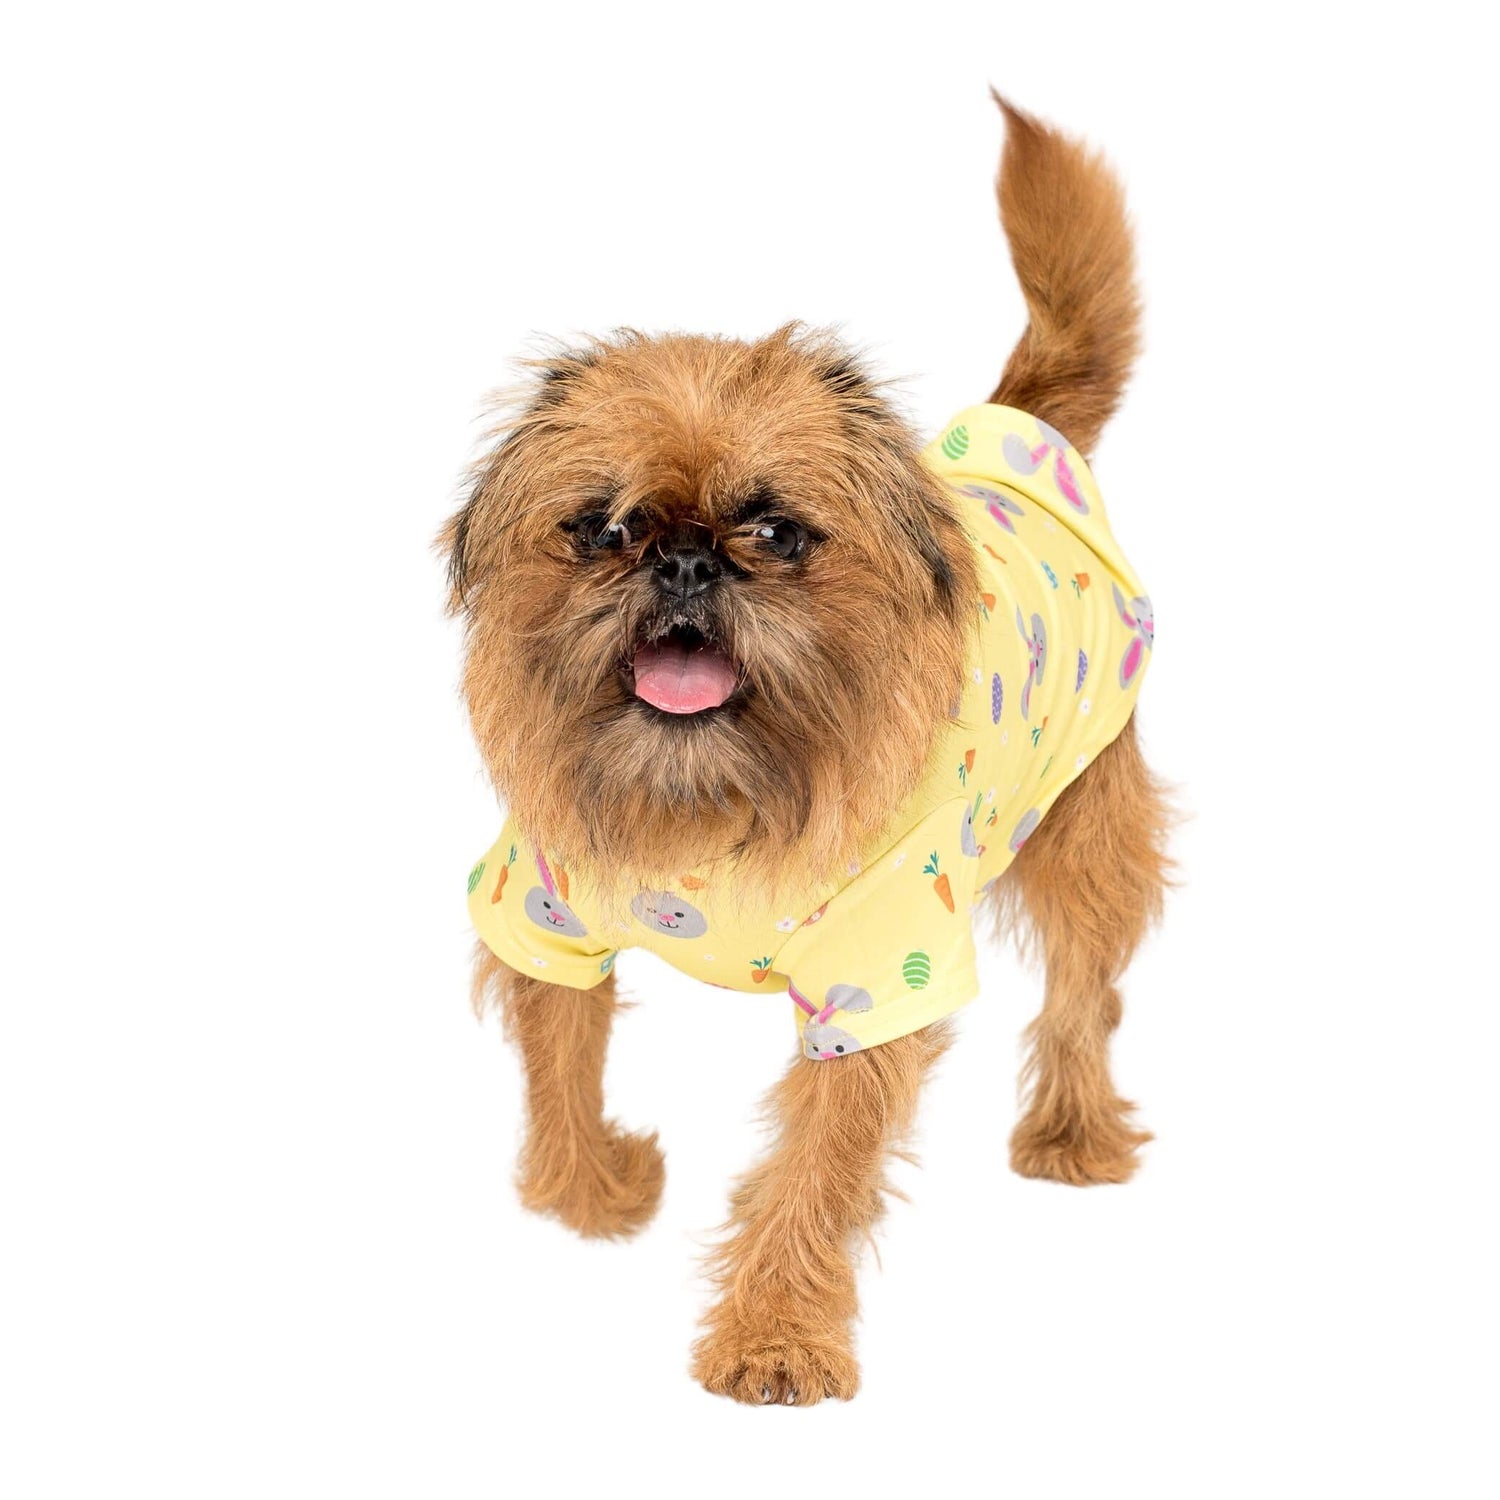 Griffon wearing Vibrant hound- Easter Dog shirt front on.